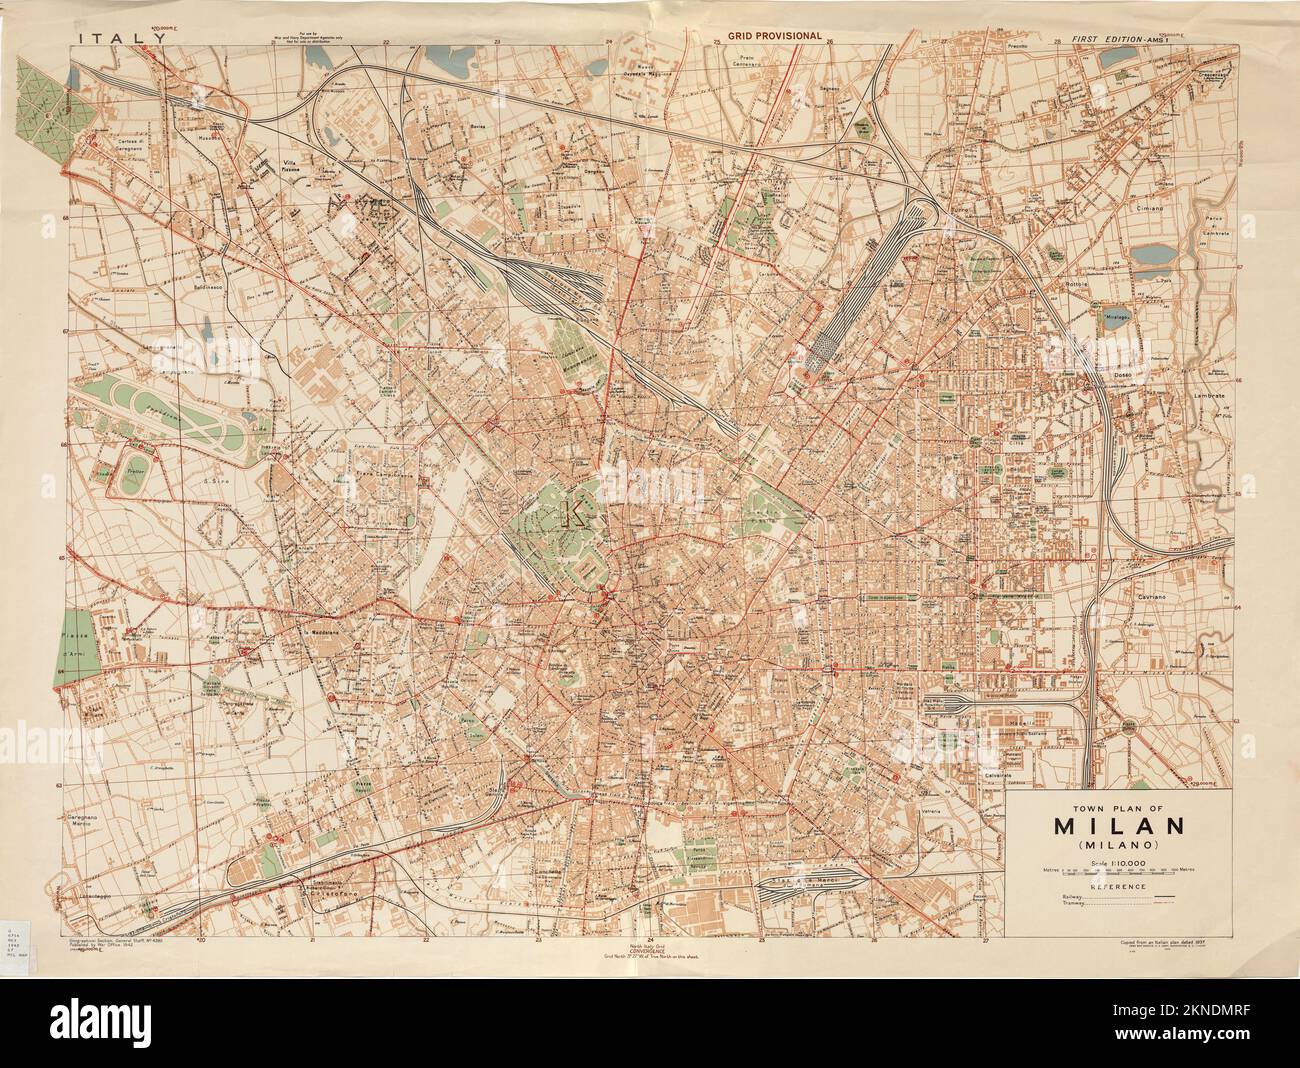 Vintage city plan of Milano and area around it from 19th century. Maps are beautifully hand illustrated and engraved showing it at the time. Stock Photo